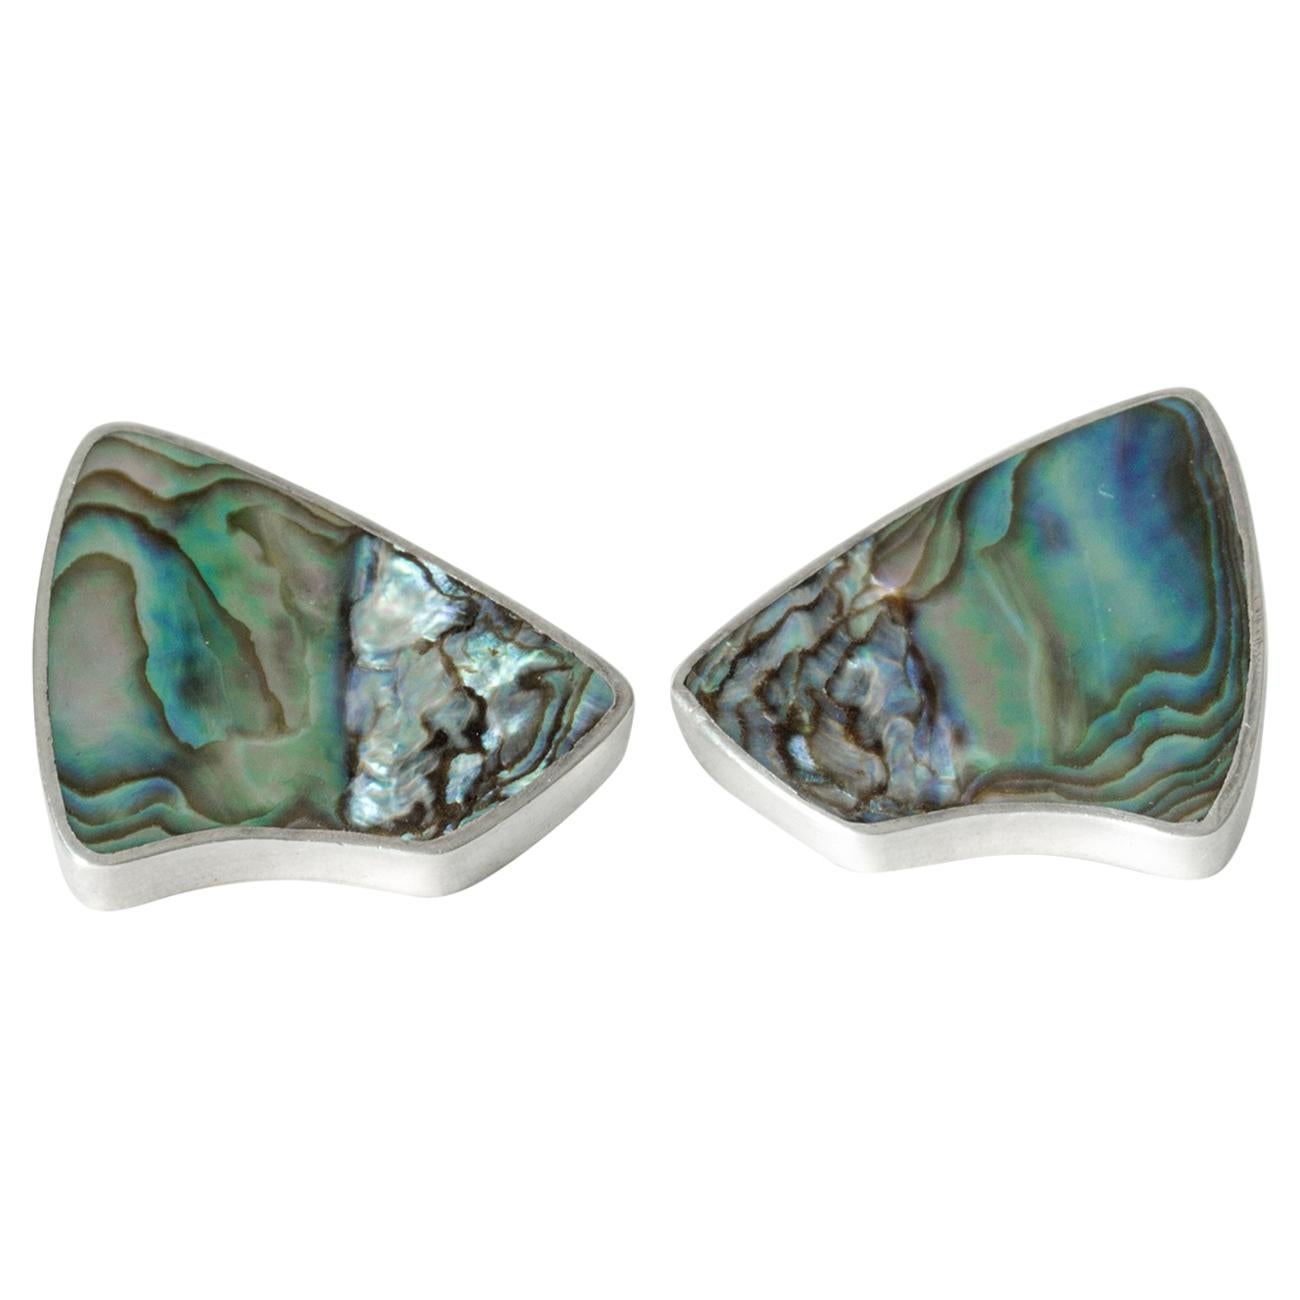 Pair of Silver and Mother of Pearl Earrings by Palle Bisgaard, Denmark, 1950s